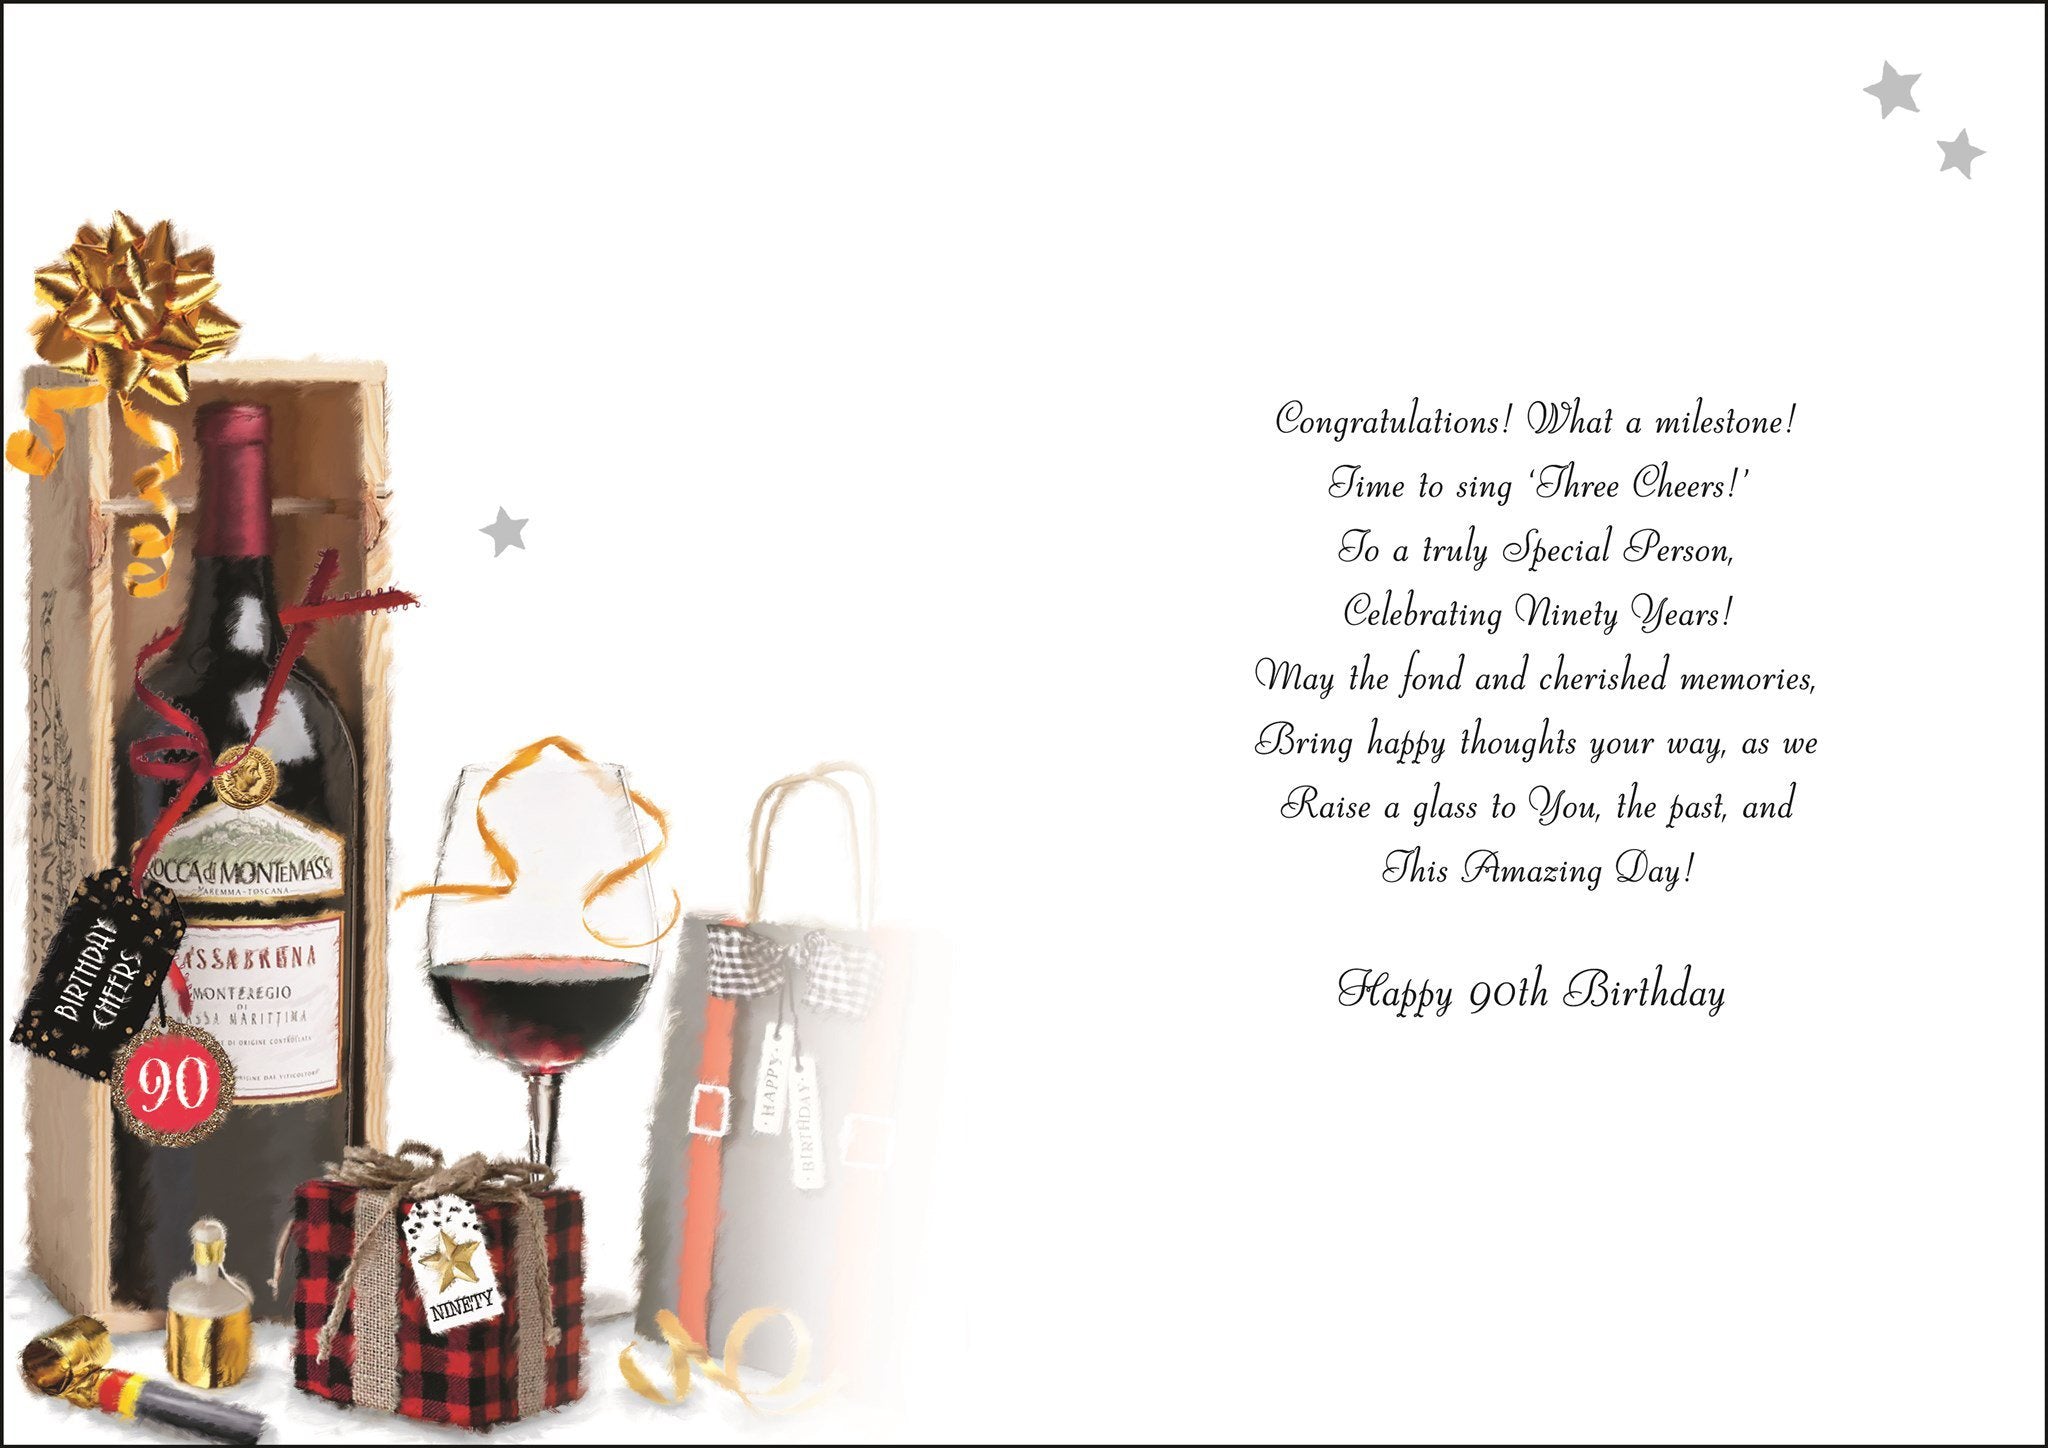 Inside of 90th Birthday Wooden Case Birthday Greetings Card